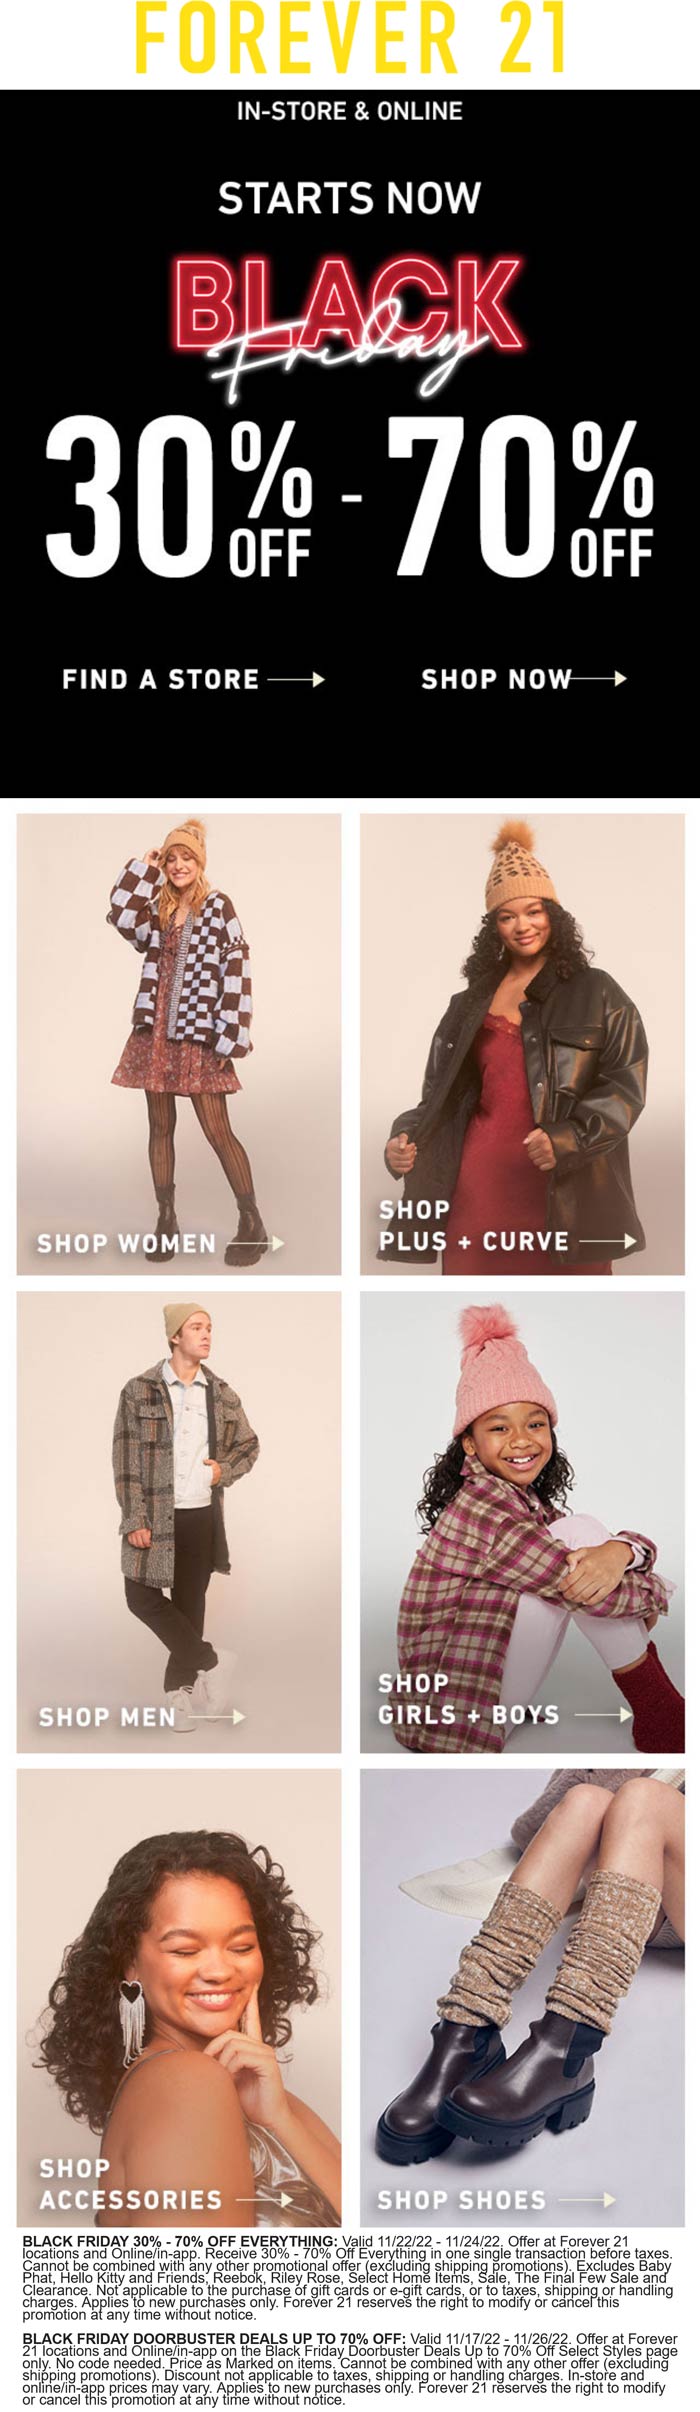 Forever 21 stores Coupon  30-70% off at Forever 21, ditto online #forever21 